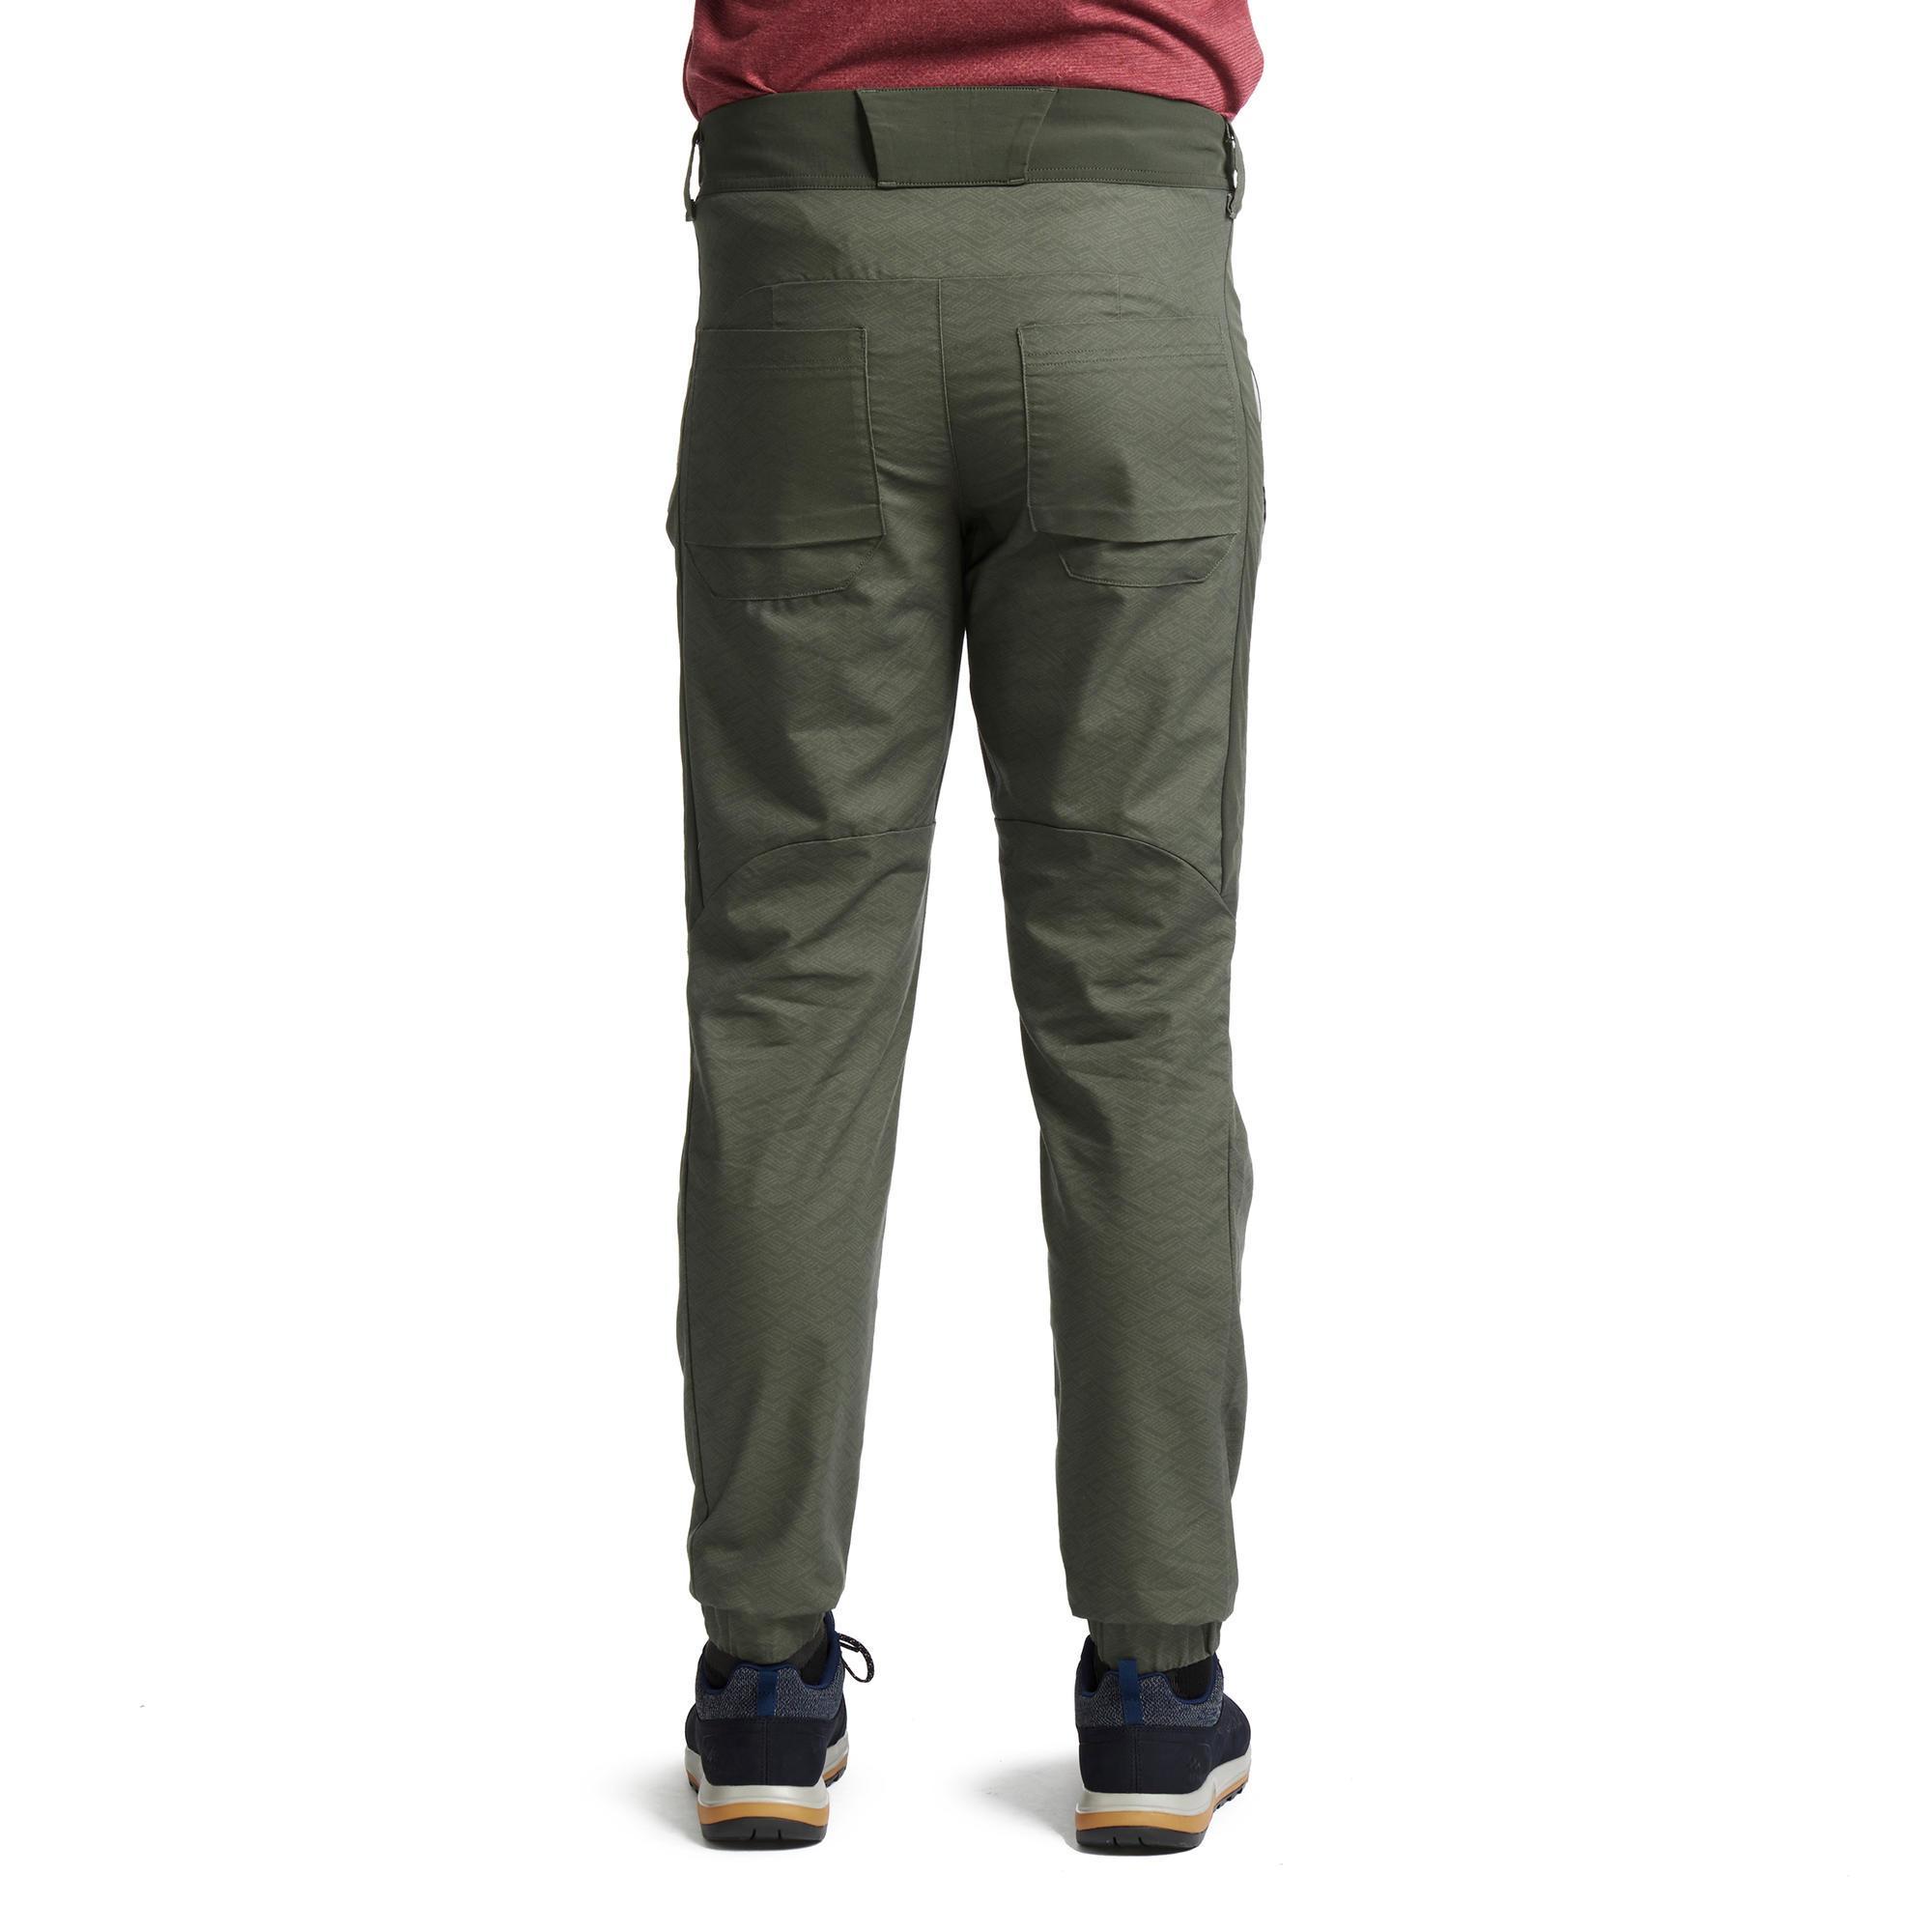 Country Walking Trousers - NH500 Slim 